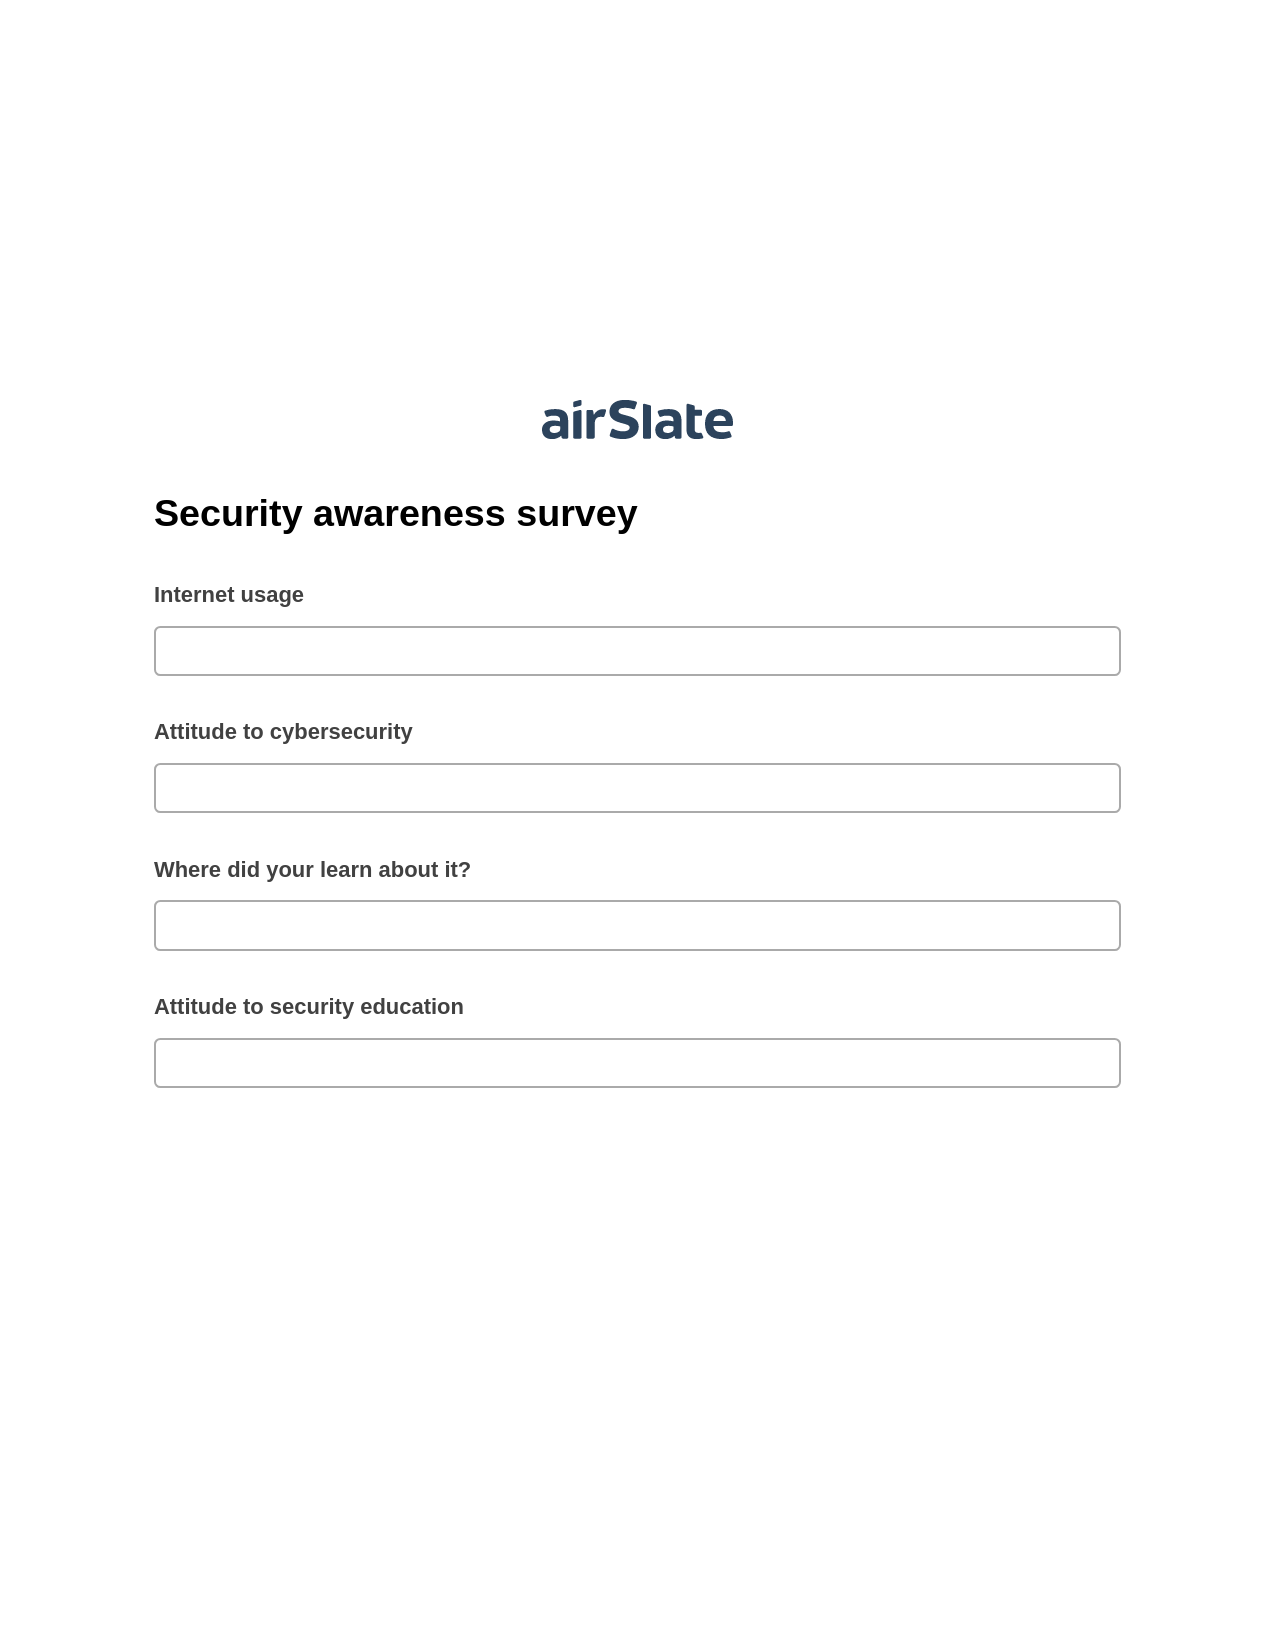 Security awareness survey Pre-fill from Excel Spreadsheet Dropdown Options Bot, Jira Bot, Box Bot